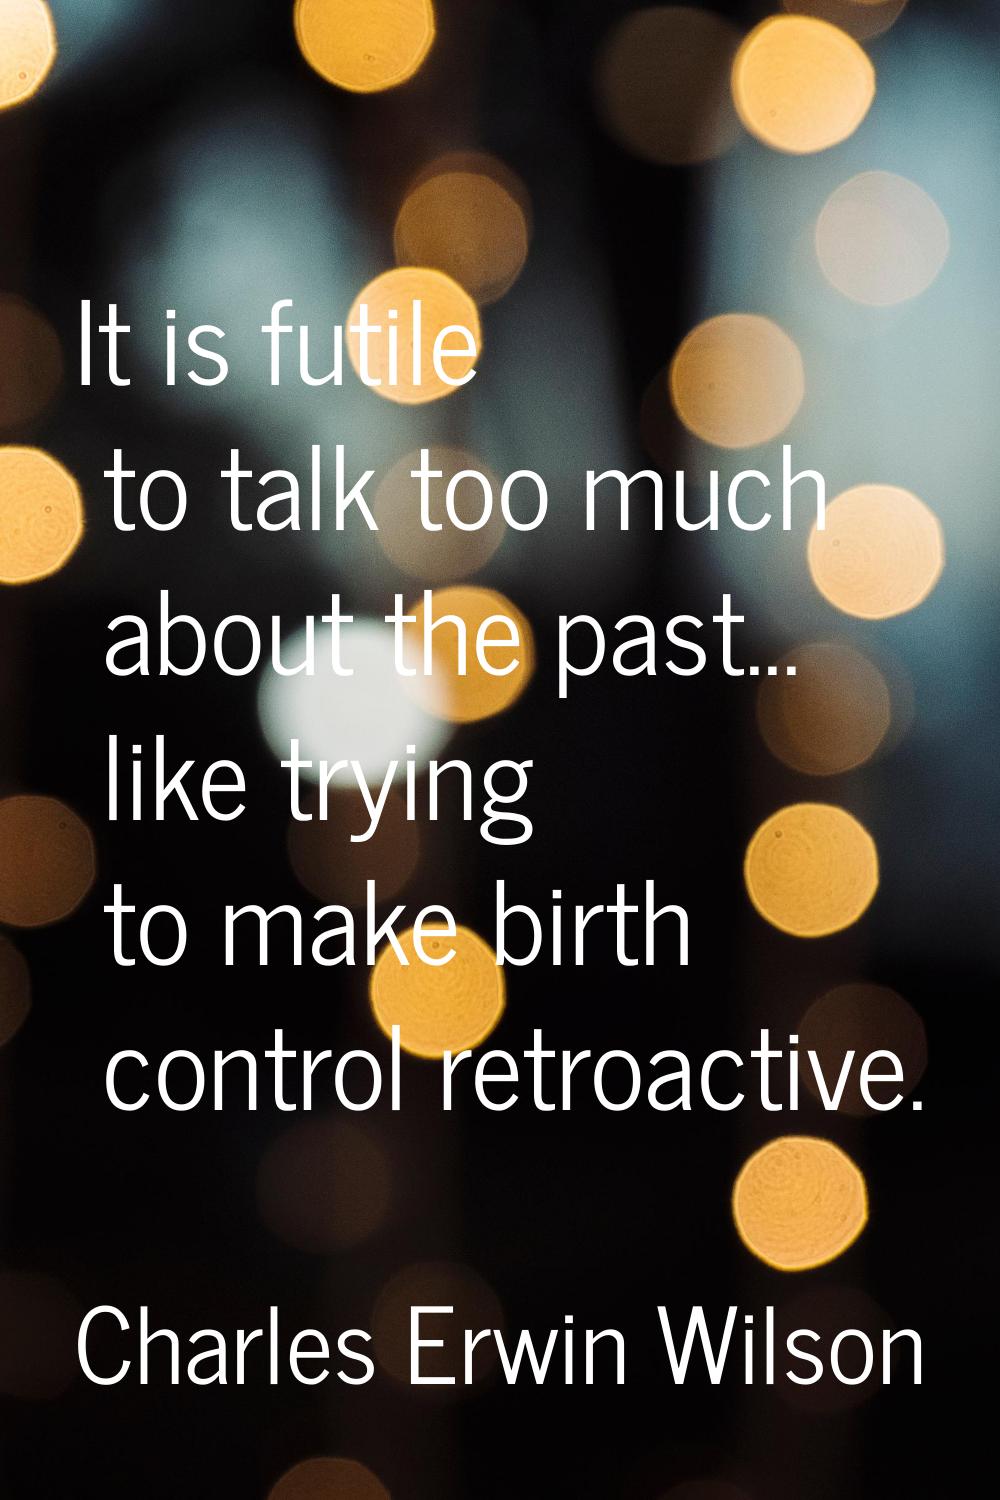 It is futile to talk too much about the past... like trying to make birth control retroactive.